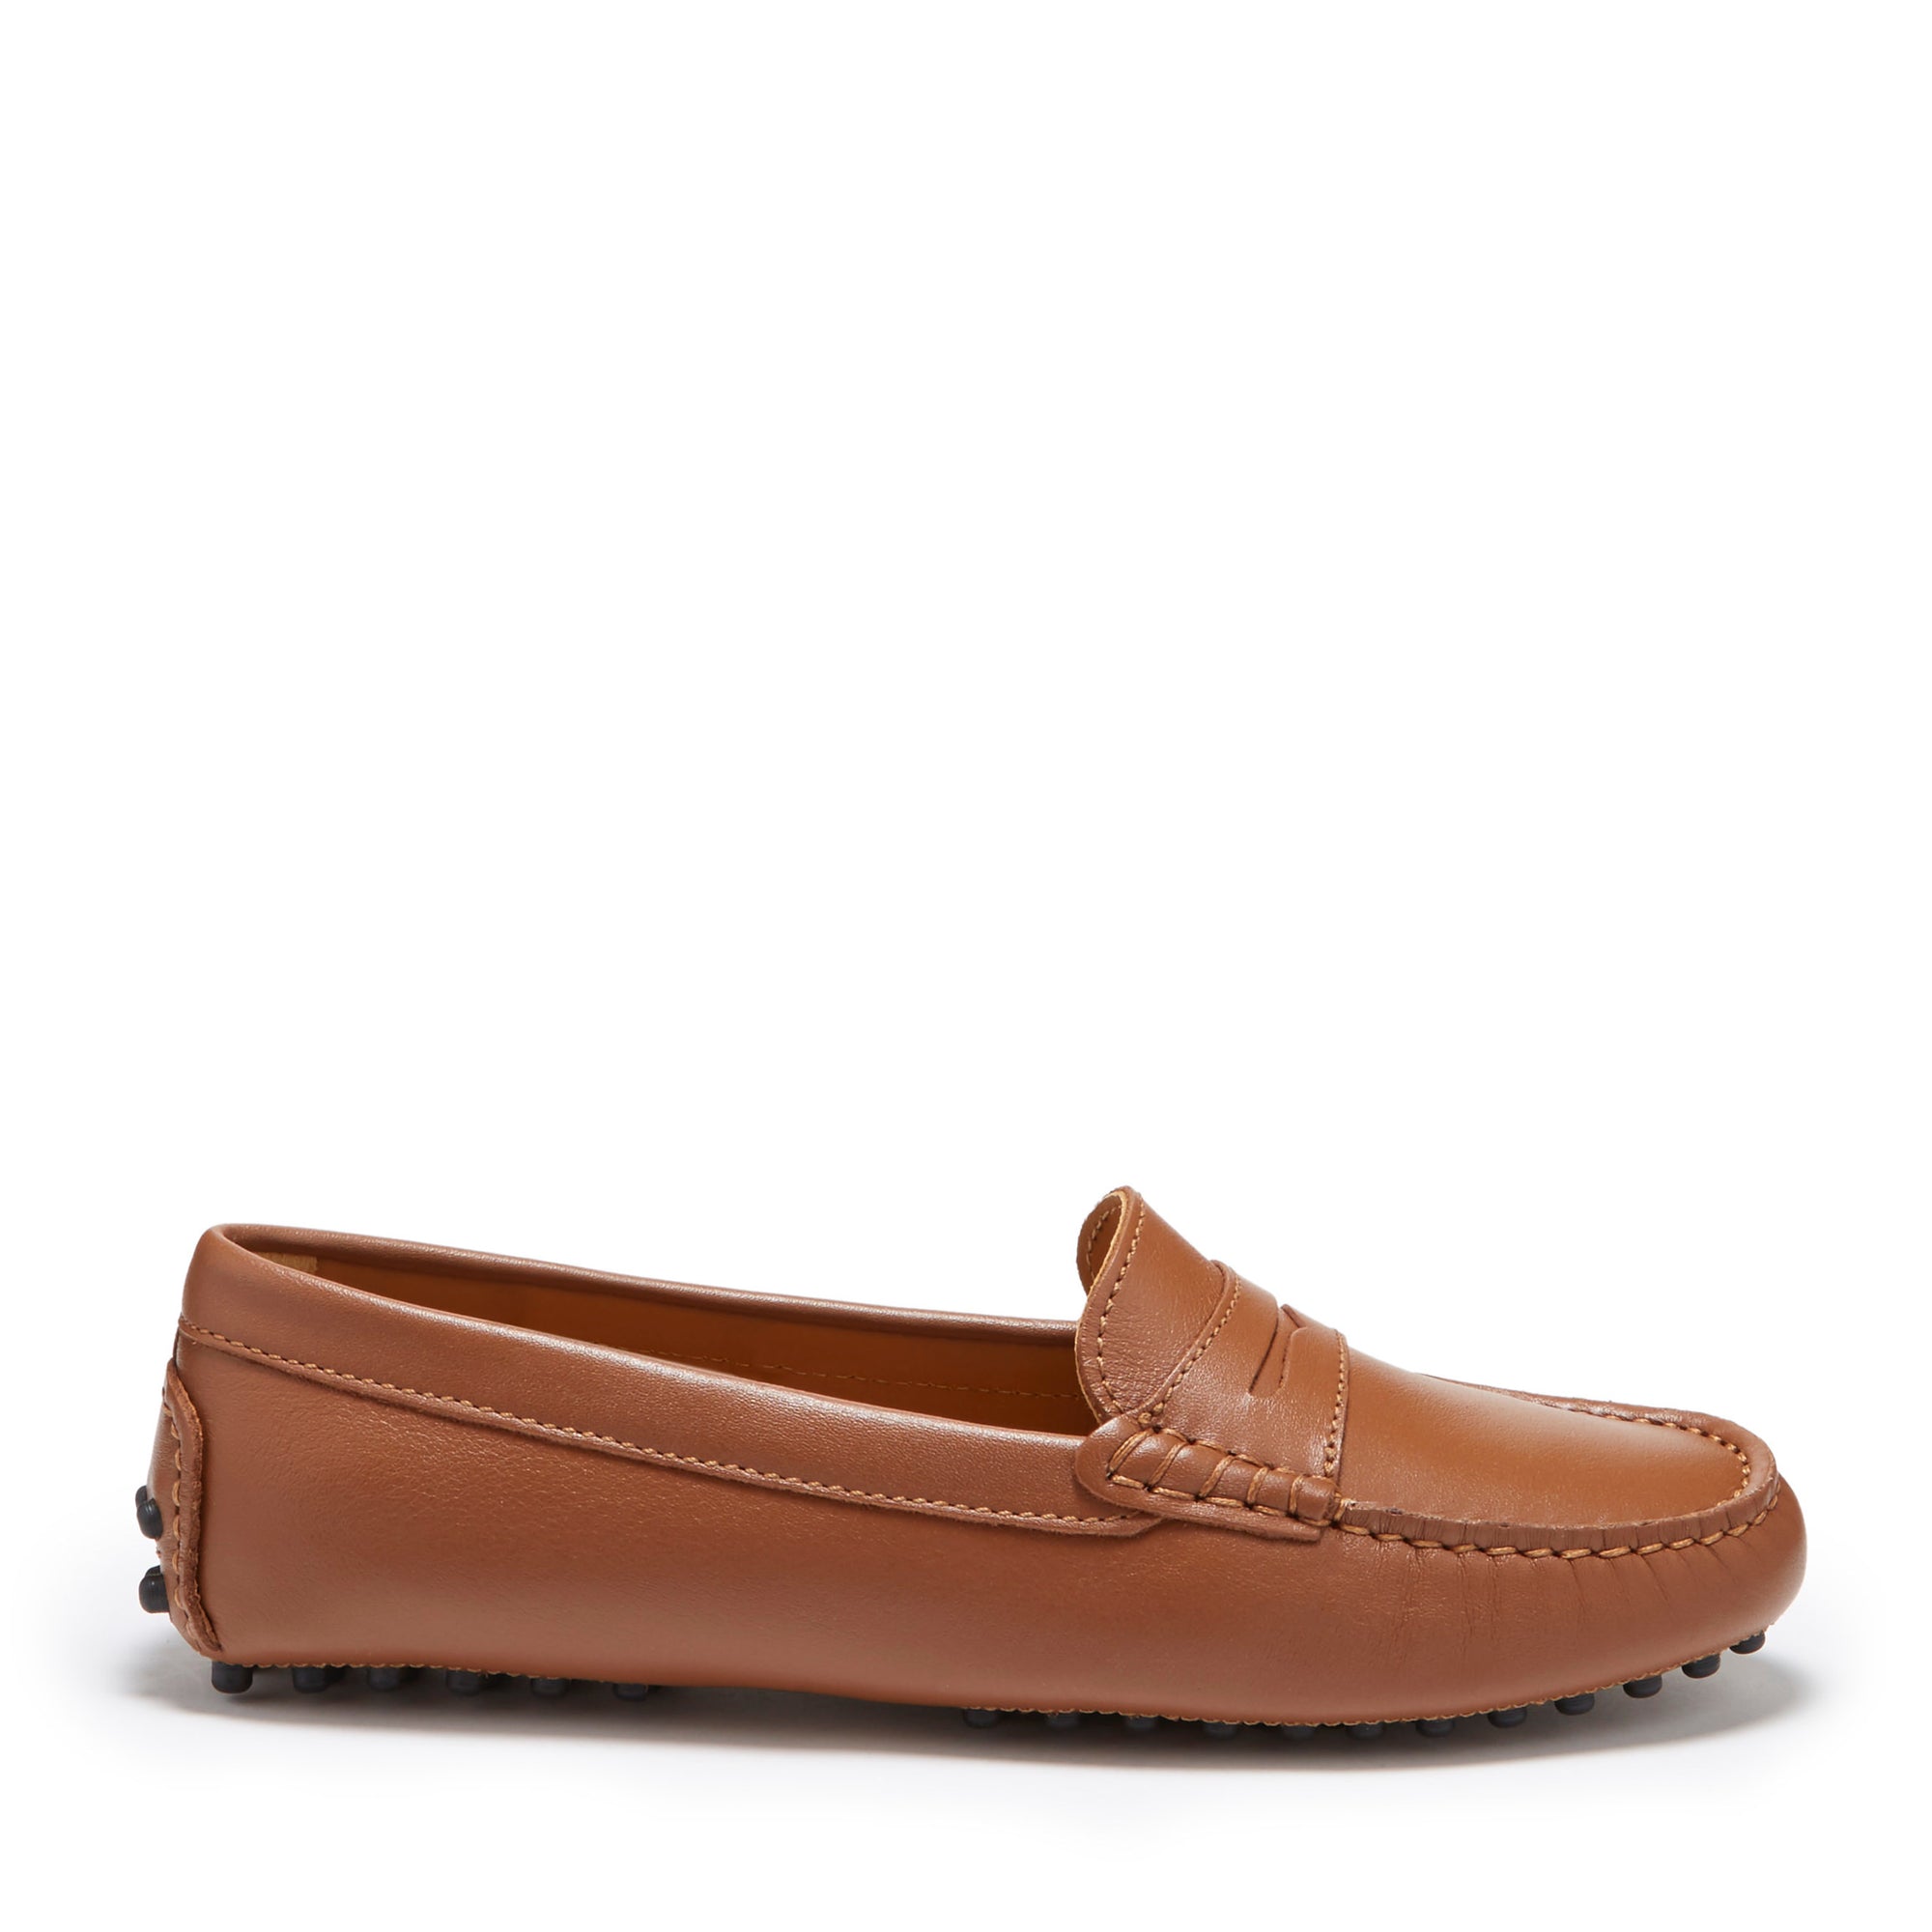 ladies tan leather loafers uk